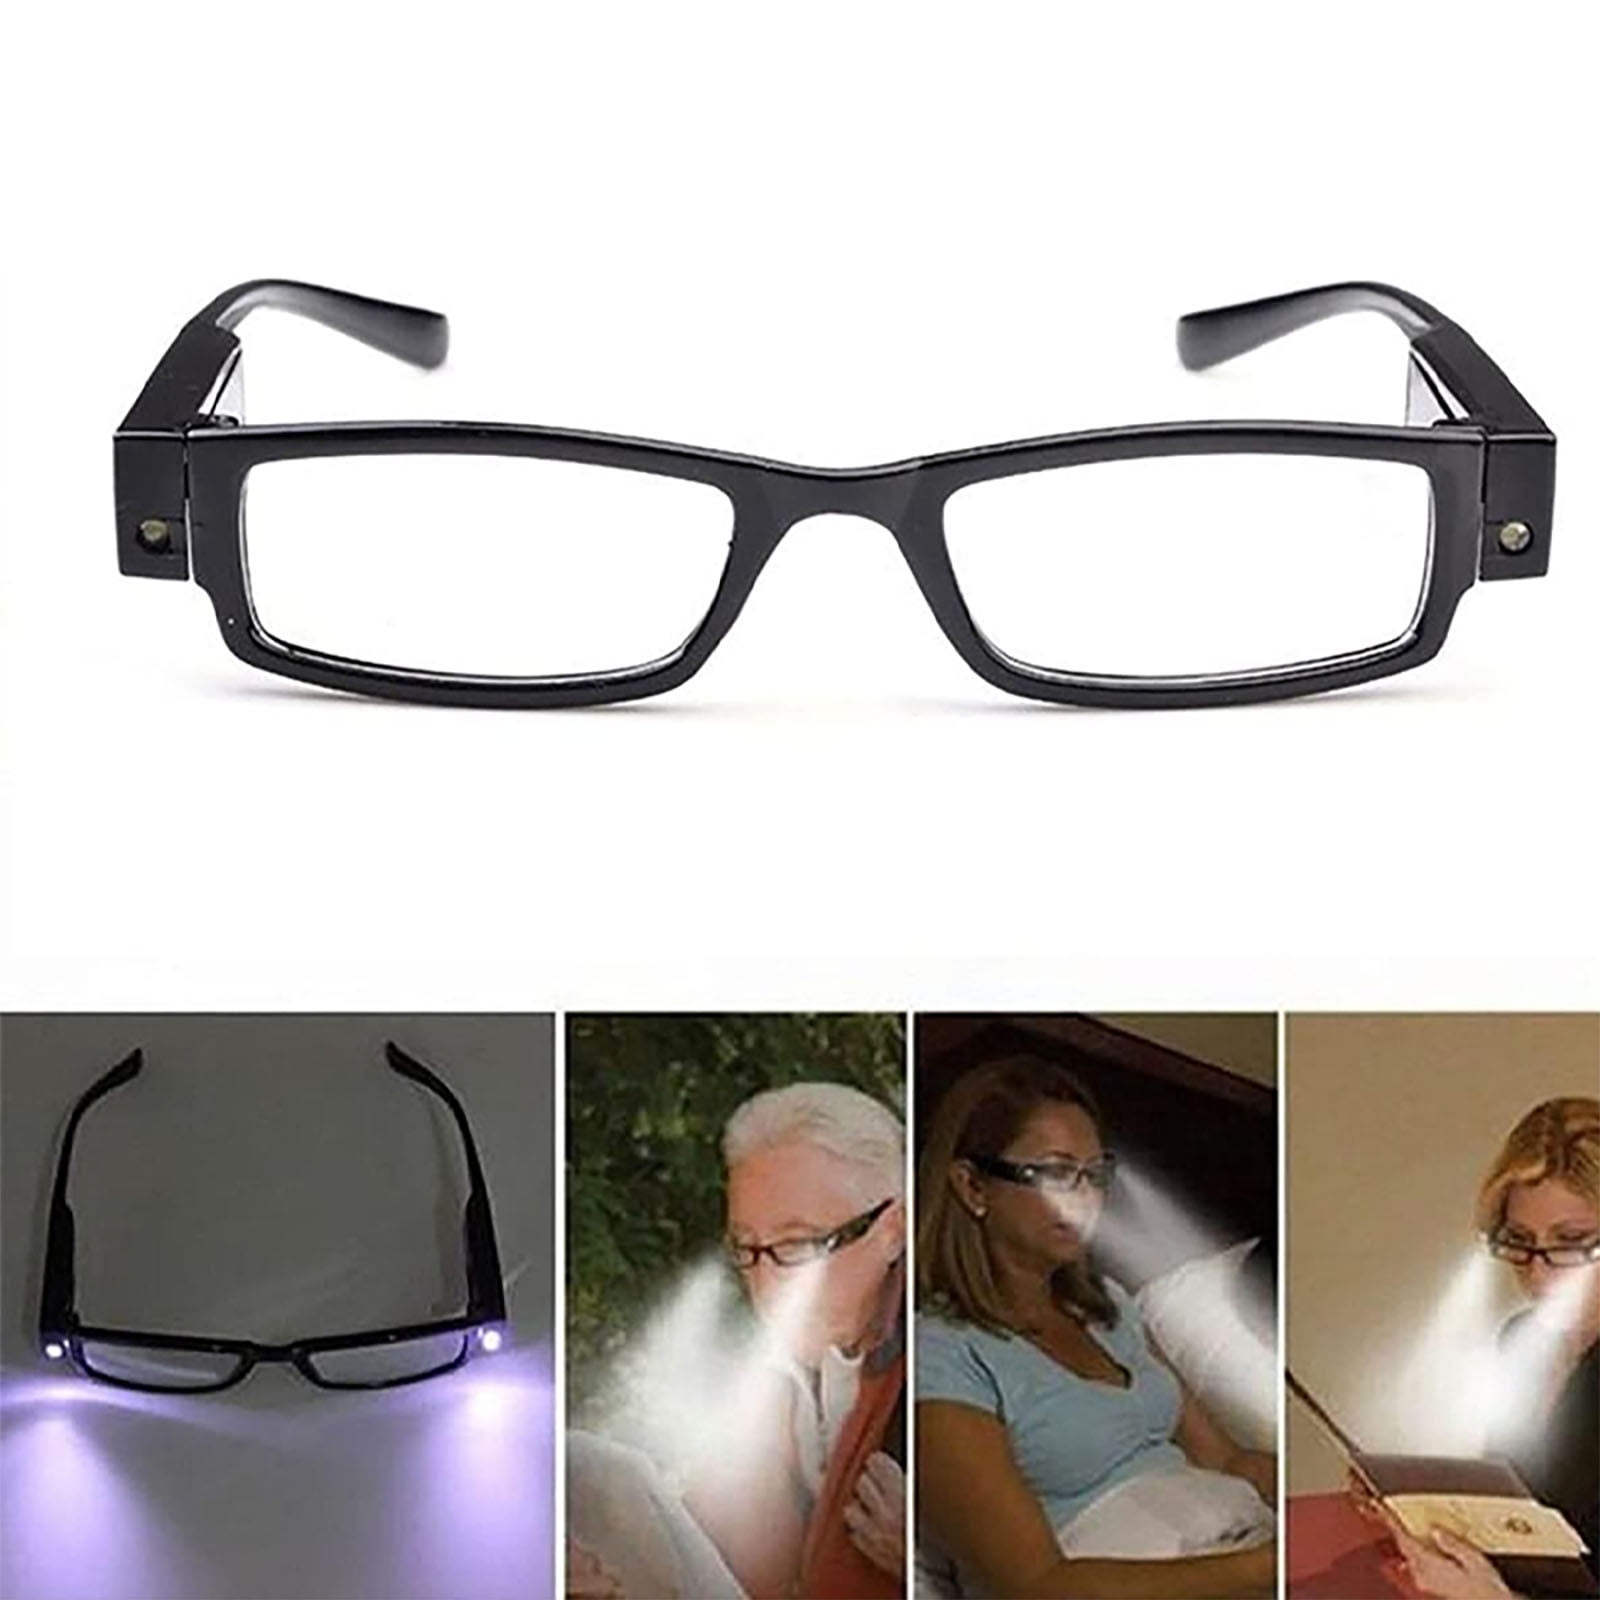 LED Magnifying Glasses w/ 1.6X Magnification 2PC - Bright Lighted Eyeglass  Lights, USB Rechargeable, Lightweight & Durable - LED Eyewear Enhances Your